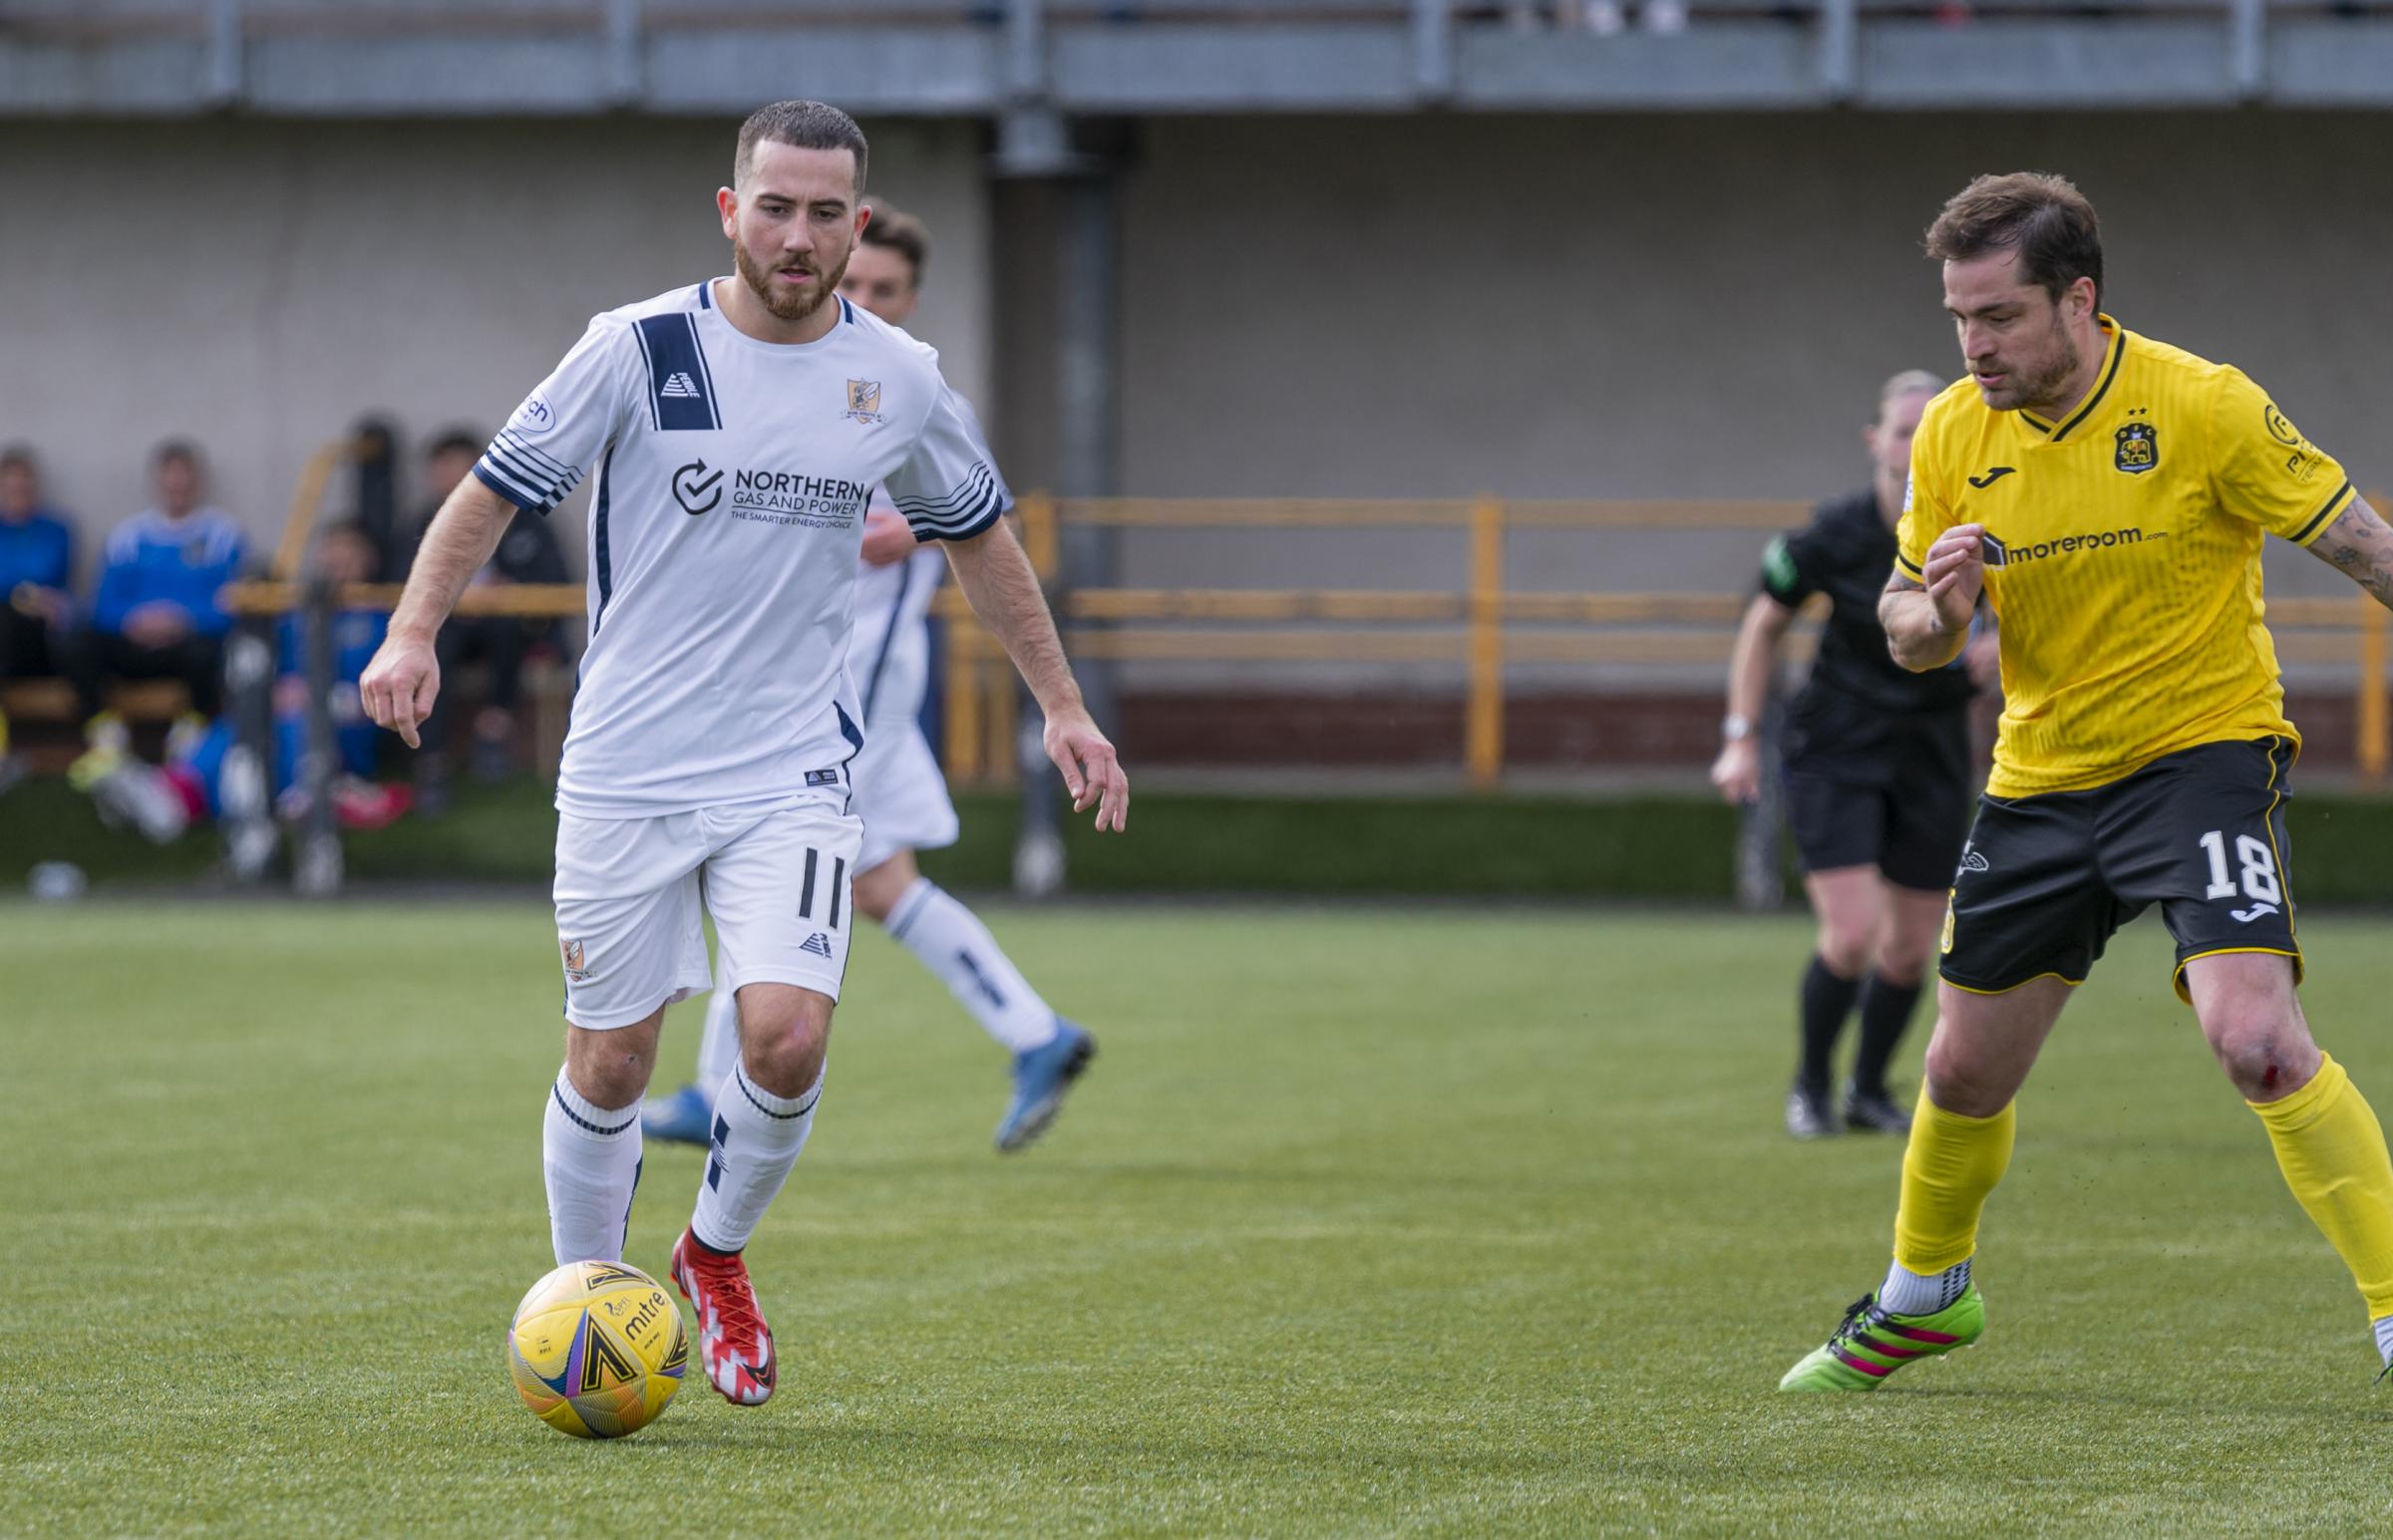 Steven Boyd's Alloa career is over after new deal couldn't be agreed